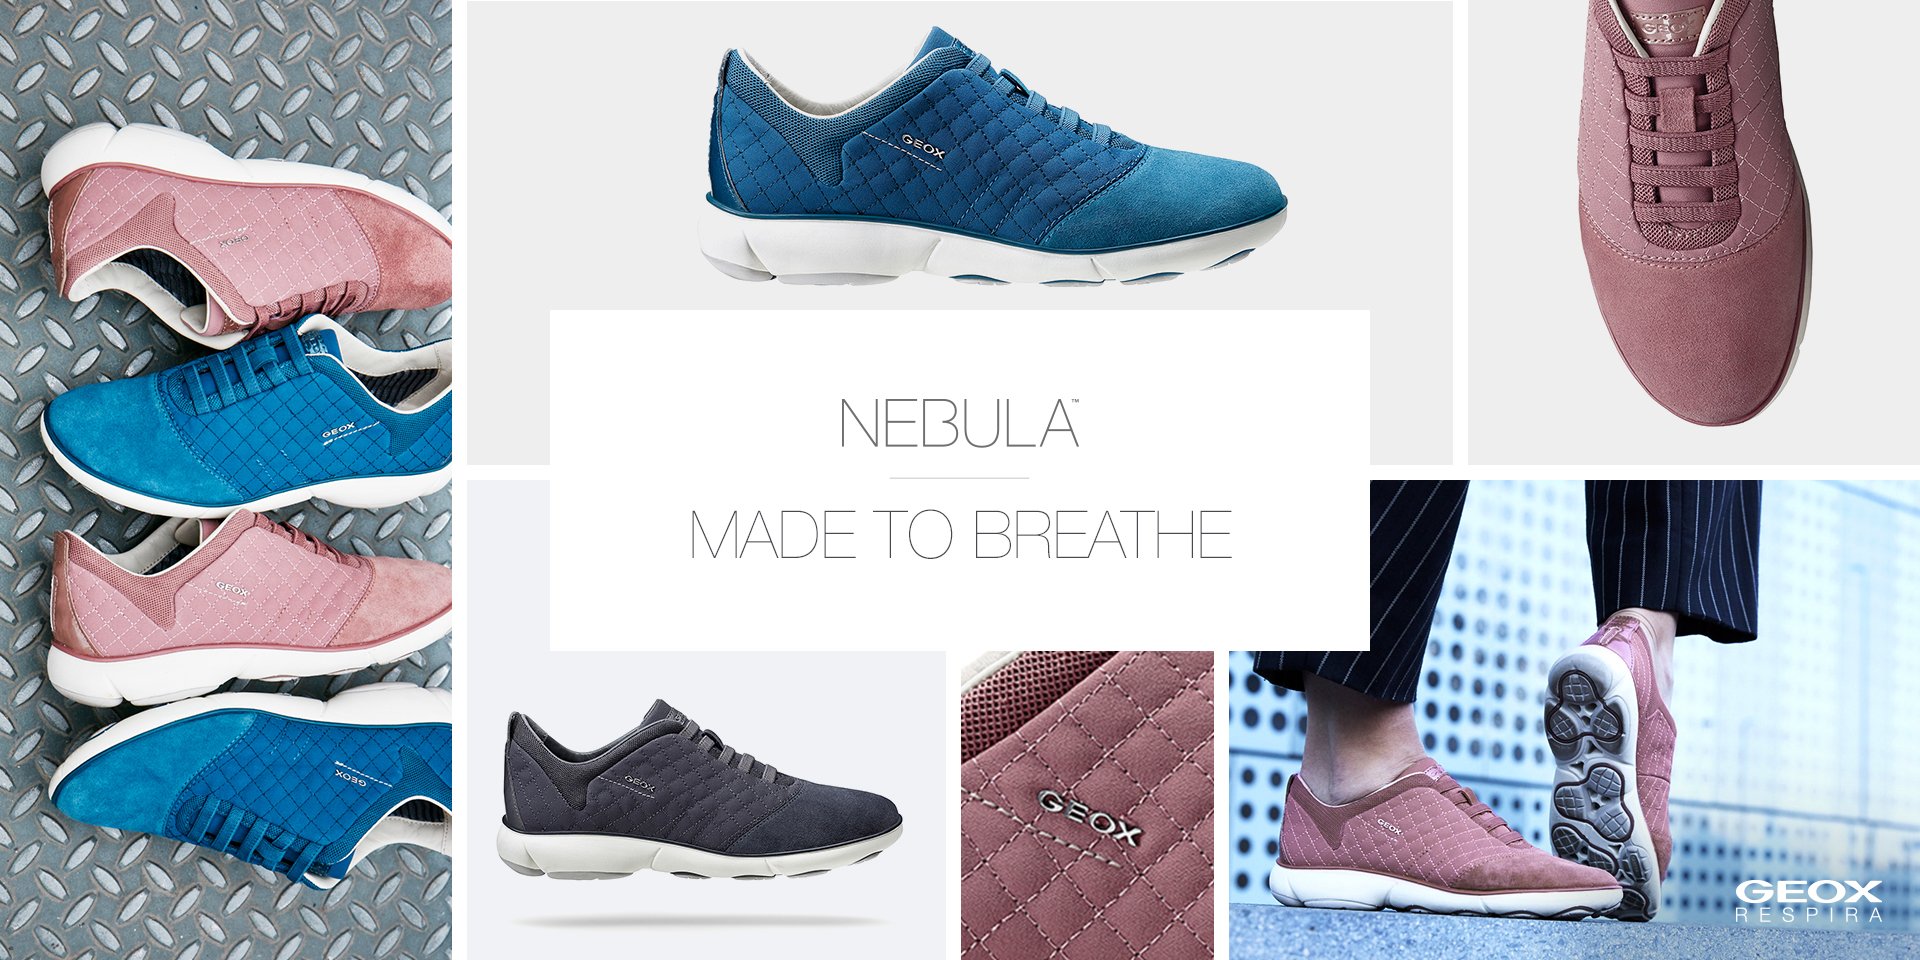 GEOX on X: "Start off on the right foot by wearing #Geox Nebula and  #StartBreathing! #women #sporty https://t.co/NhQcztsMlH  https://t.co/qqqZz4SL6M" / X